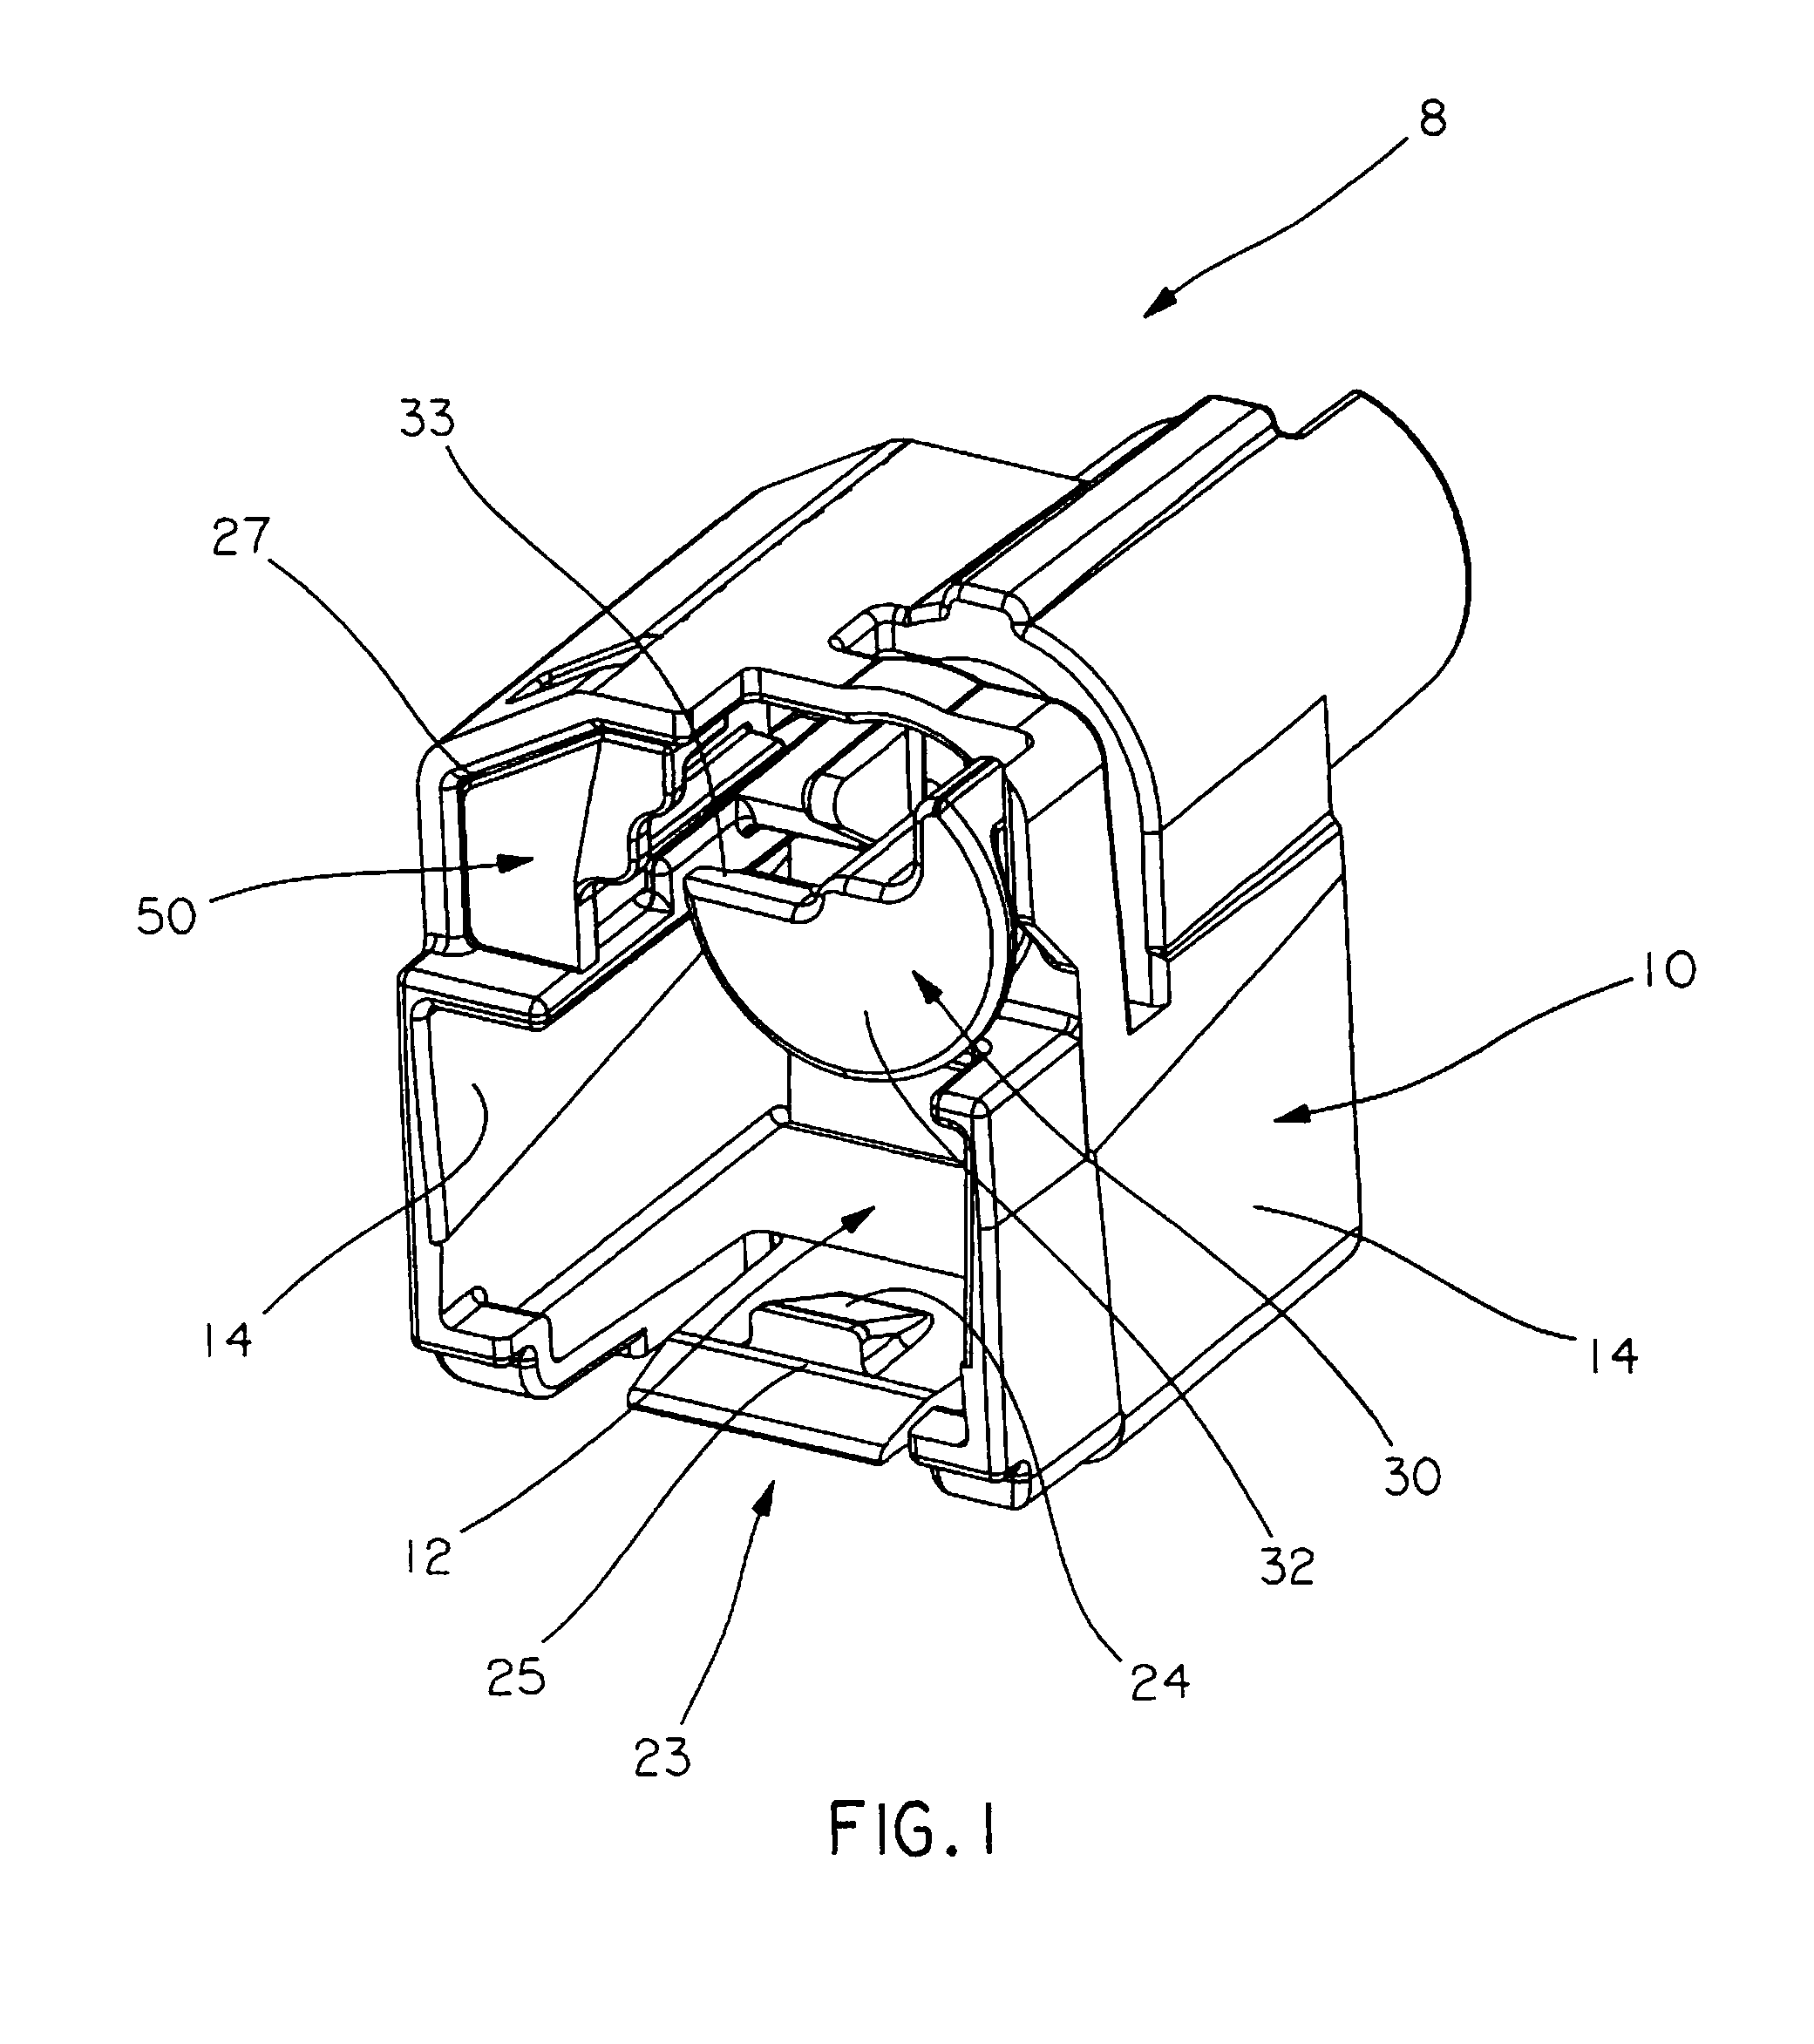 Plug locking assembly and system